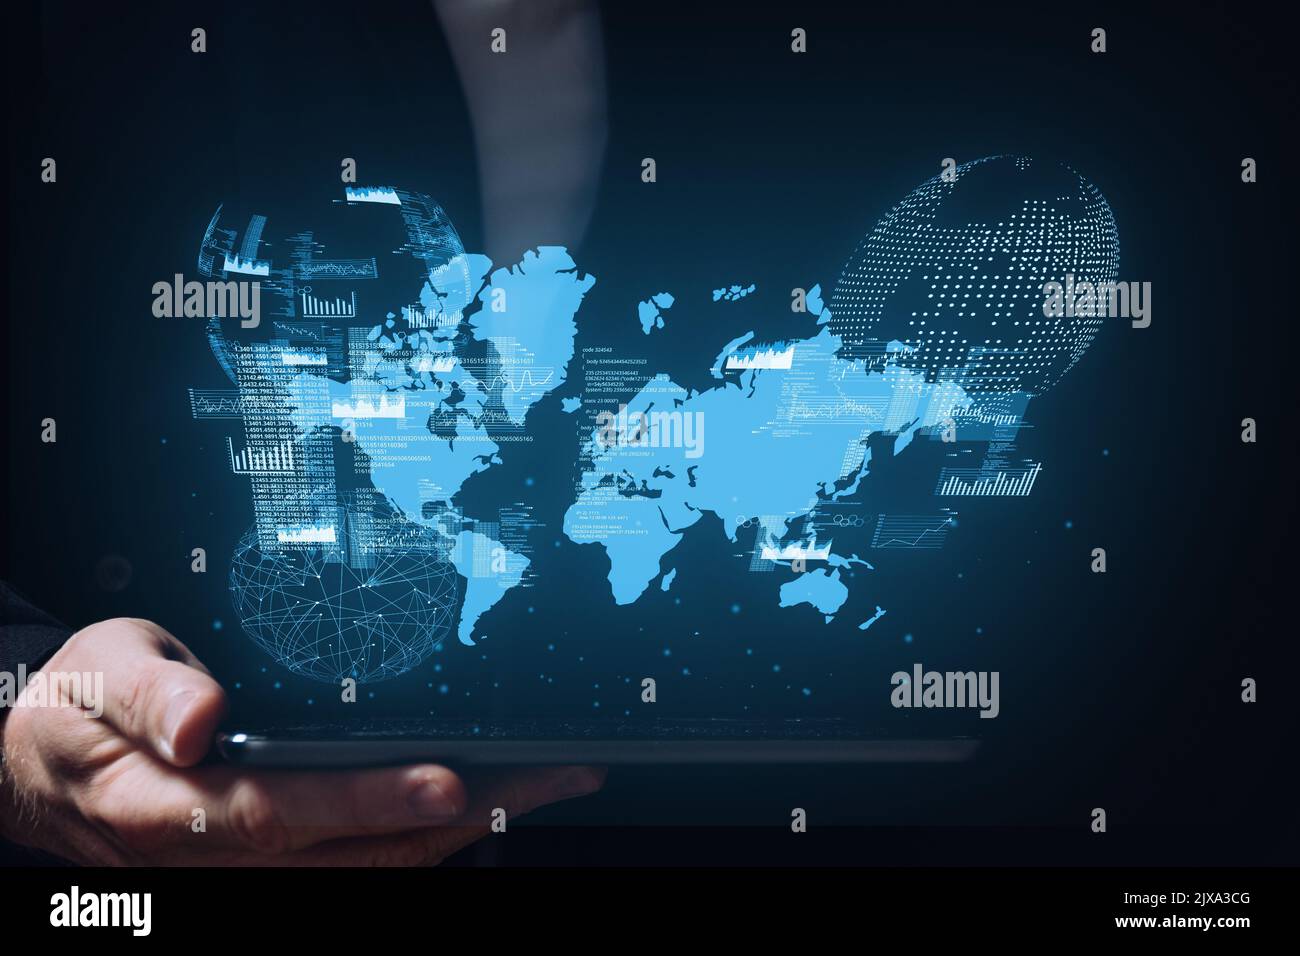 Global network of connections. Business and marketing. Person holding a smartphone with a world map hologram. Stock Photo